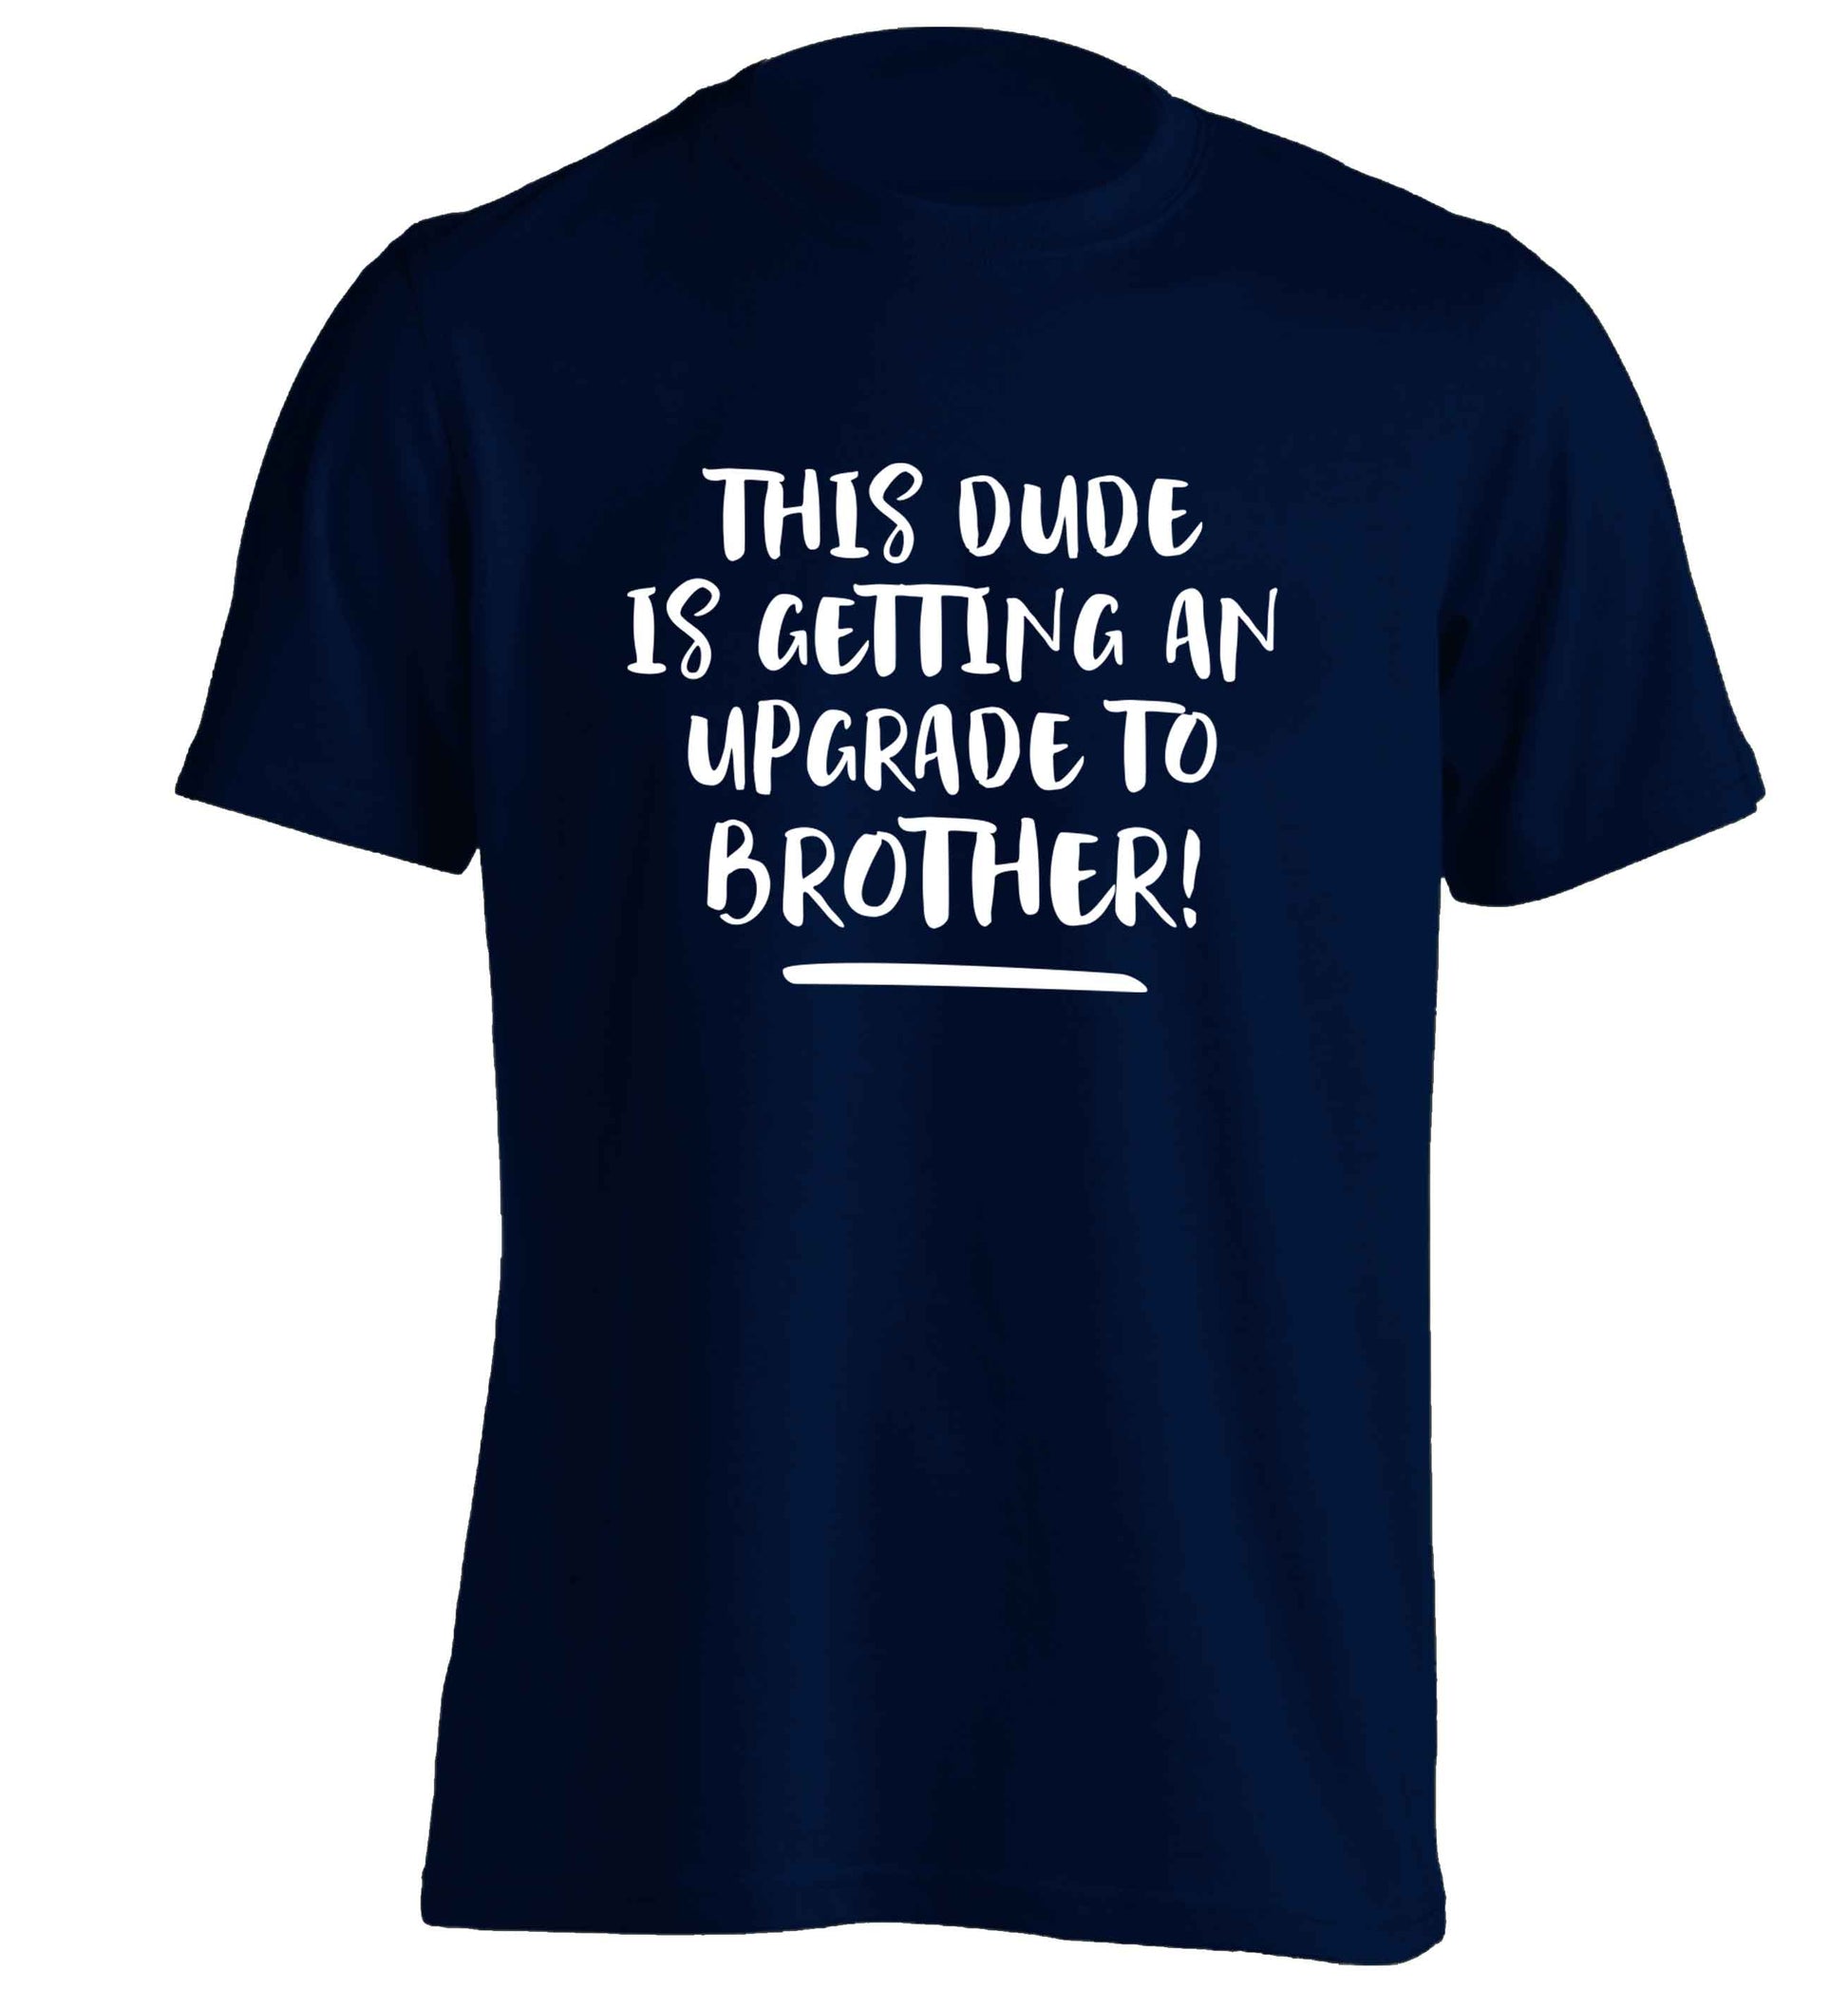 This dude is getting an upgrade to brother! adults unisex navy Tshirt 2XL